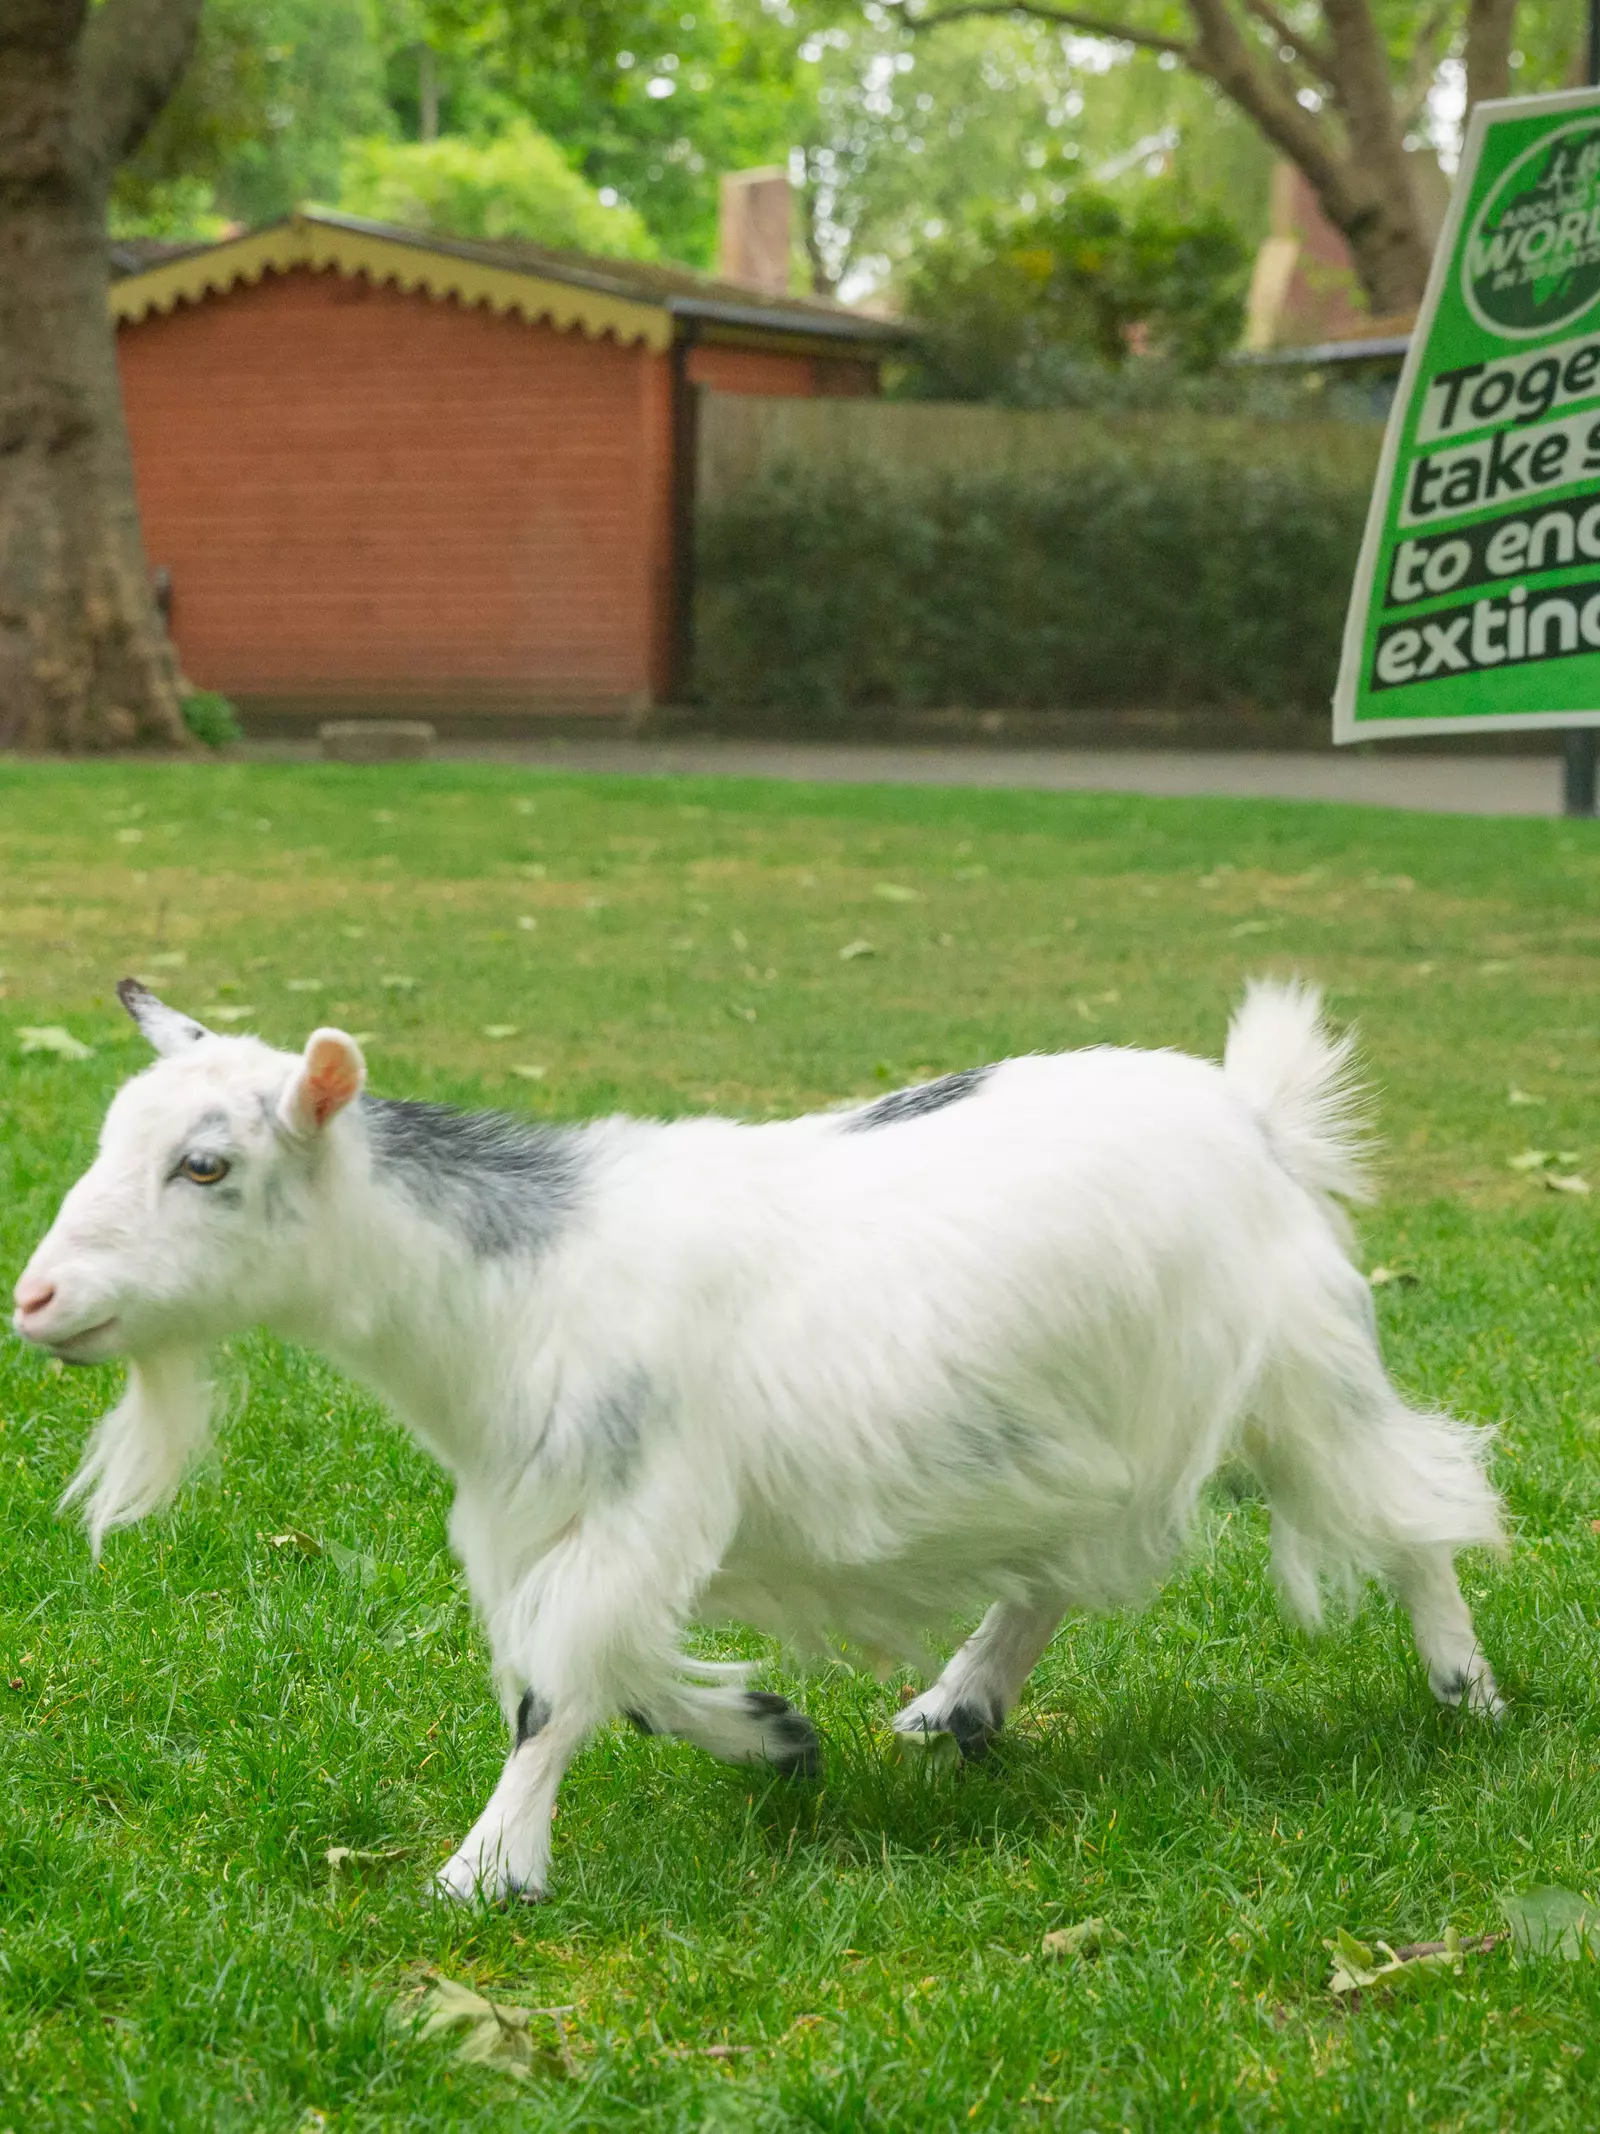 Pygmy goats practice their Around the World challenge at London Zoo 